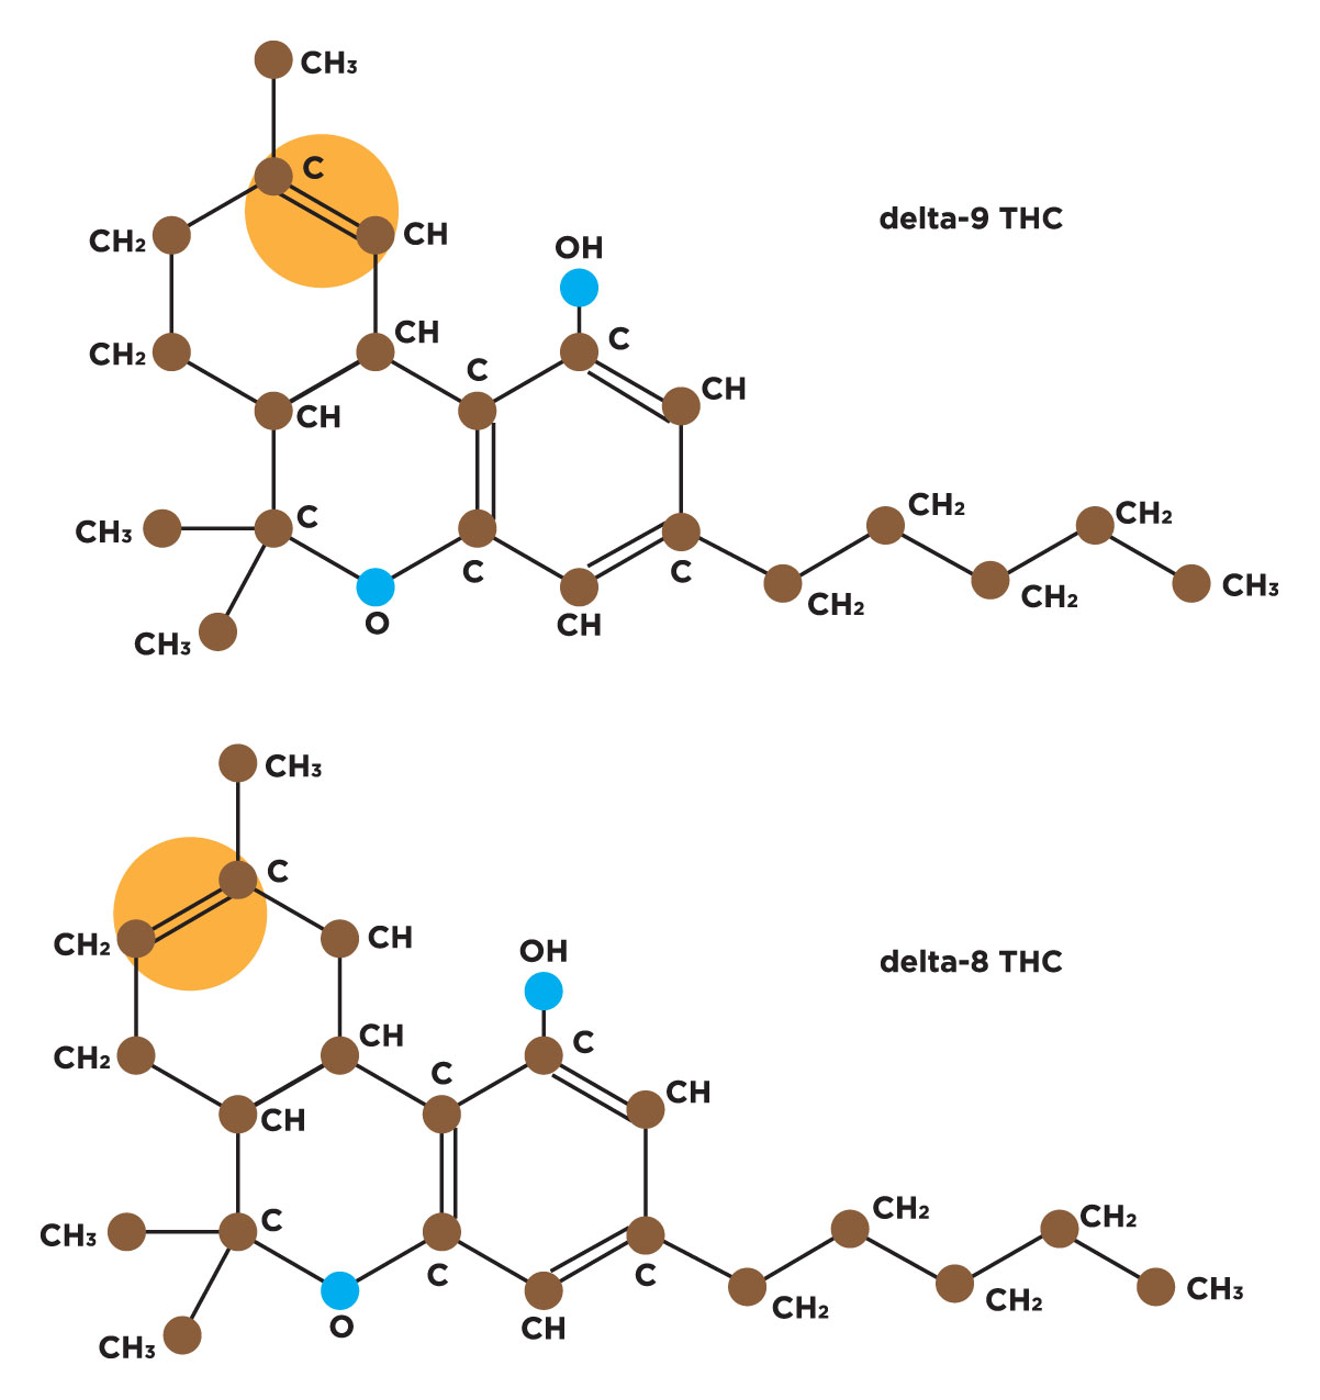 The Delta 8 THC molecule differs from Delta 9 due to the location of one double bond in its chain of carbon atoms (highlighted in orange).